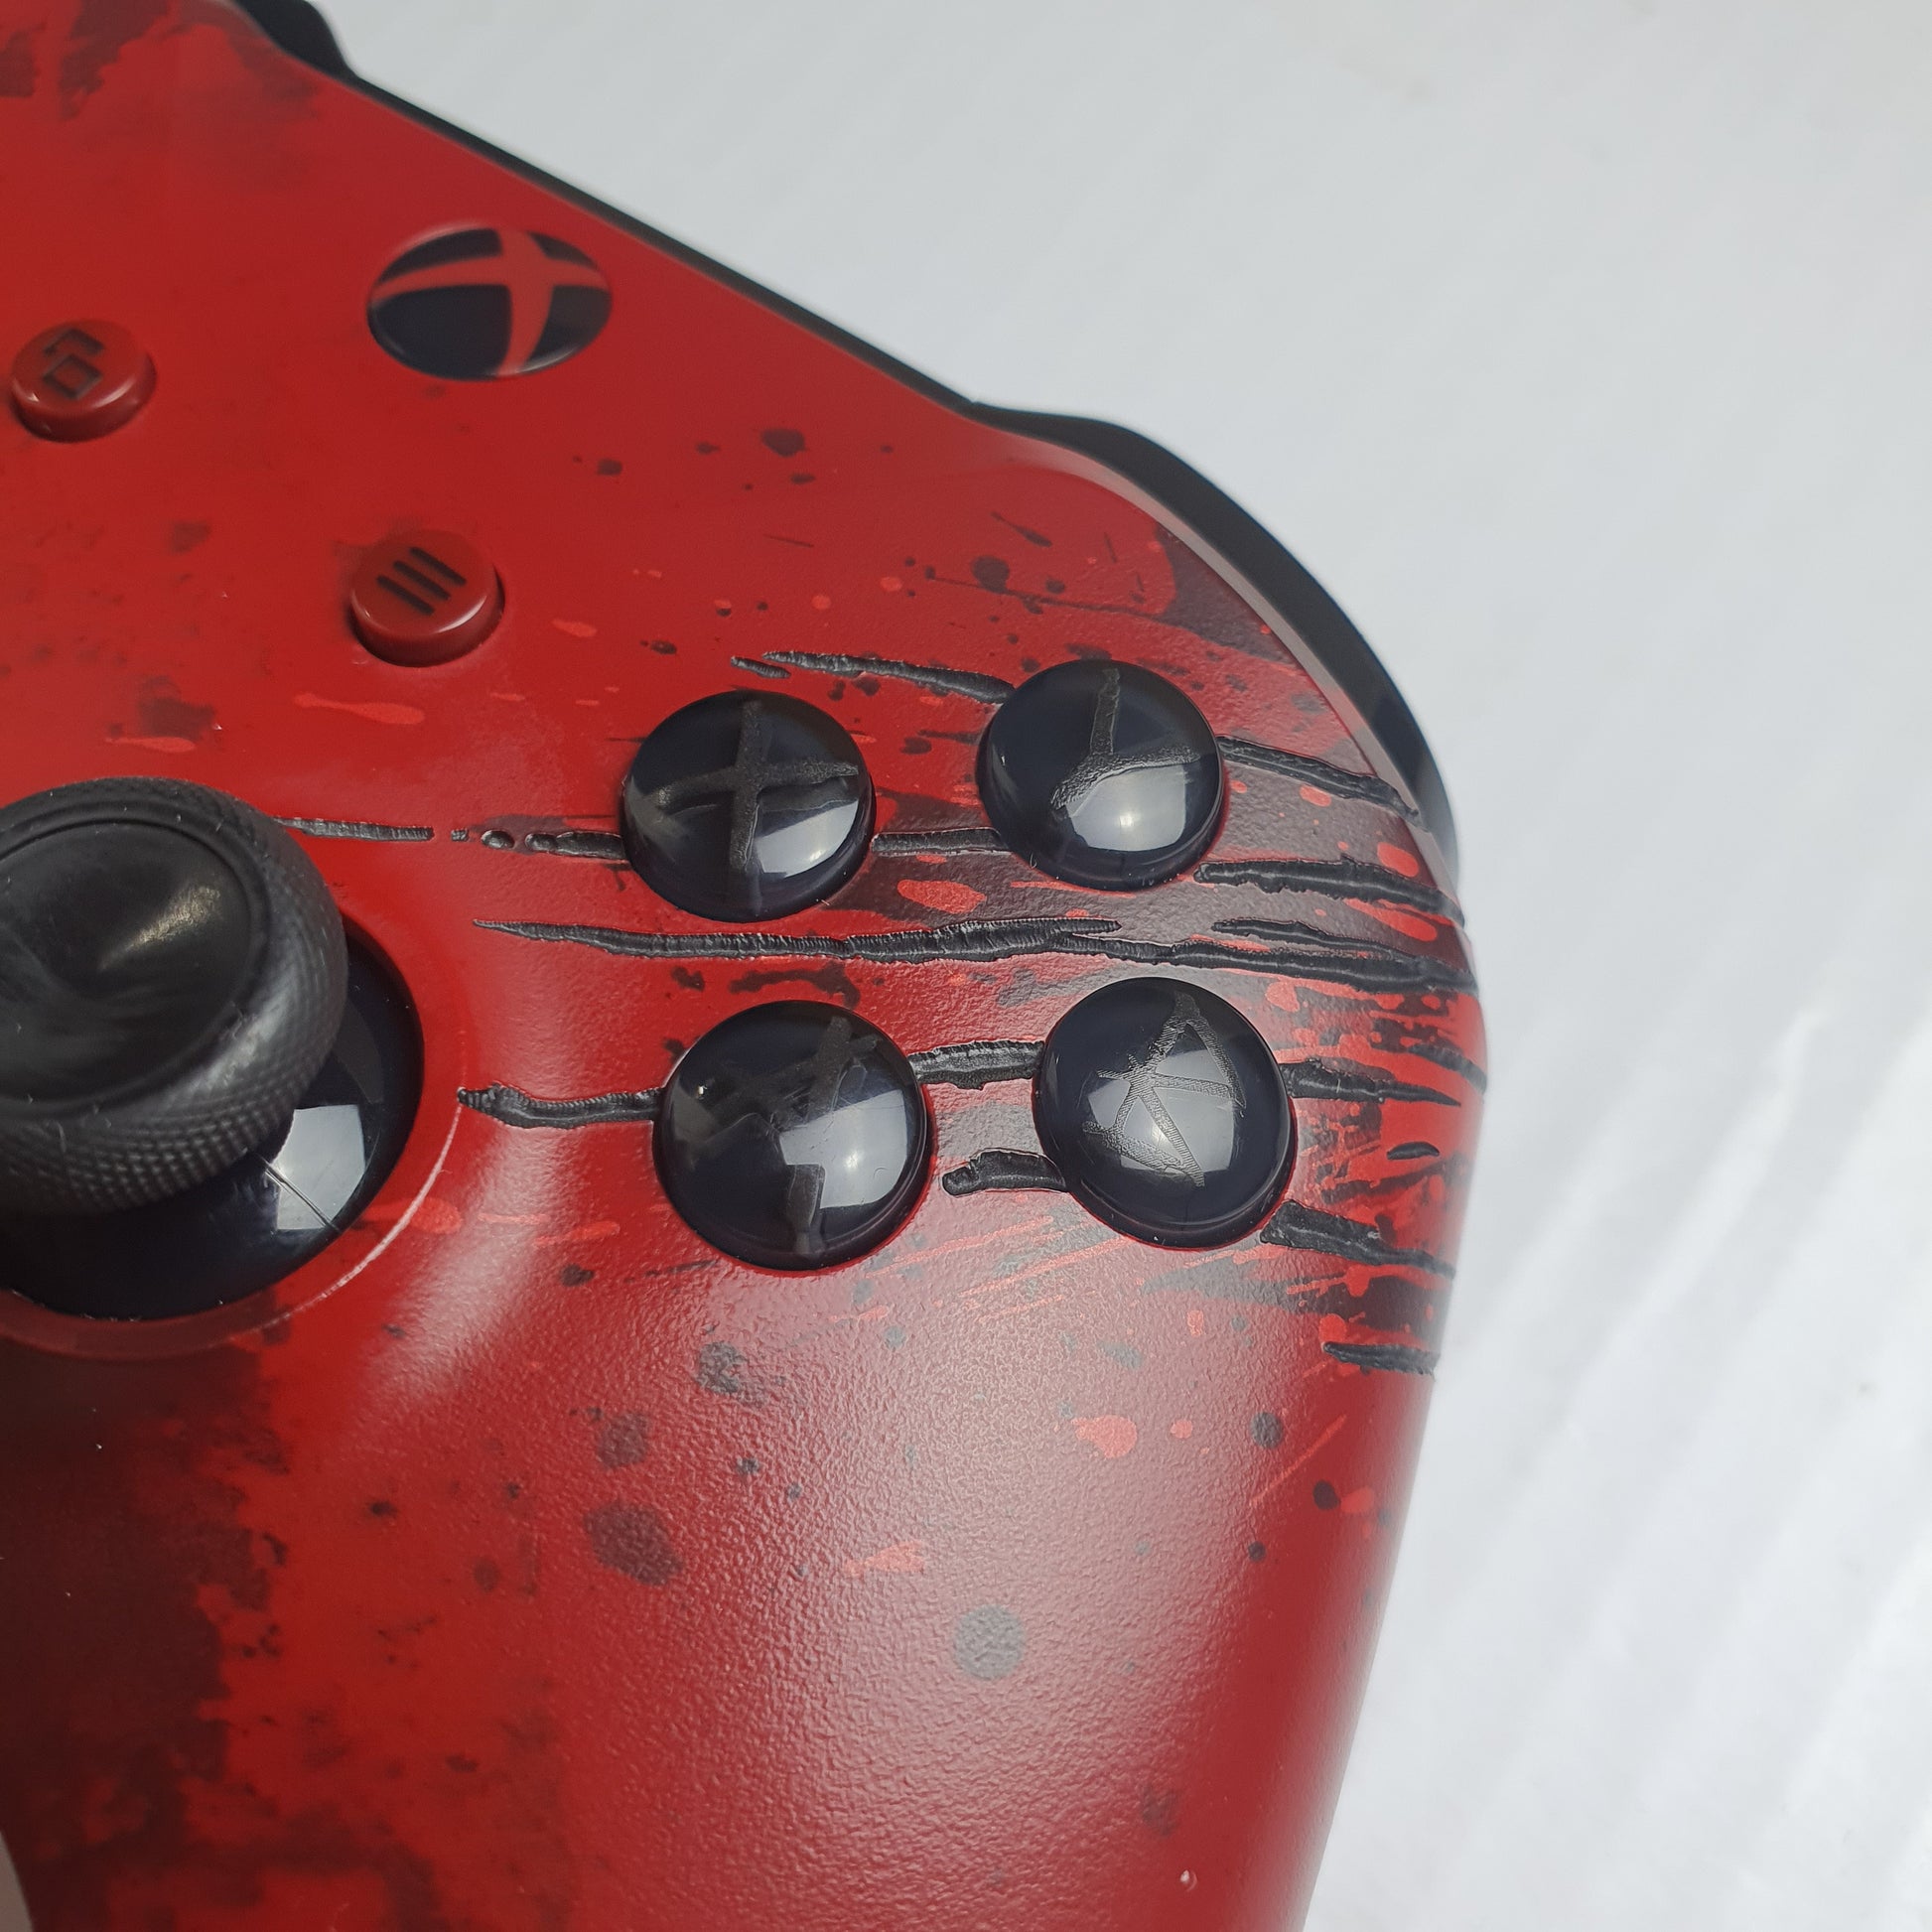 xbox one Controller Gears of War 4 Crimson Omen Limited Edition